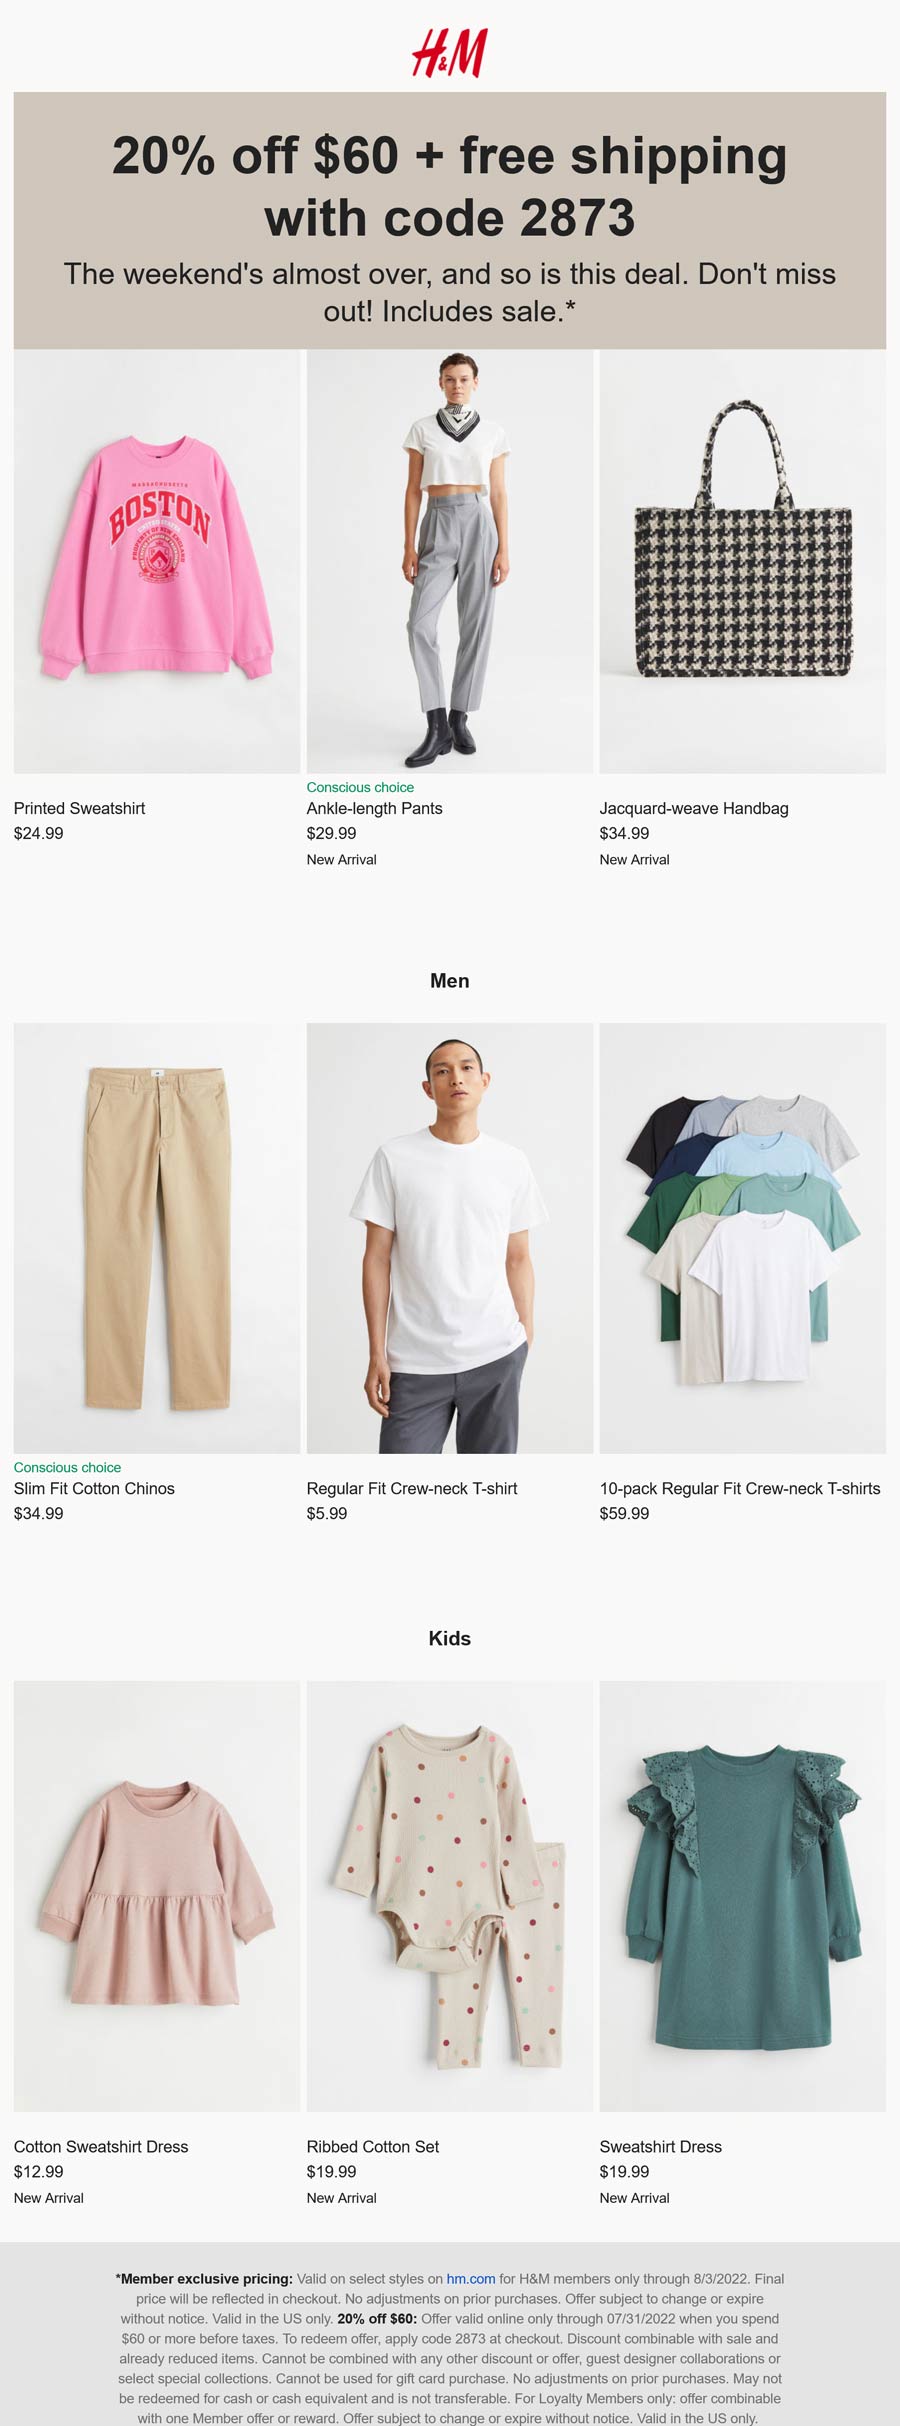 H&M stores Coupon  20% off $60 at H&M via promo code 2873 #hm 